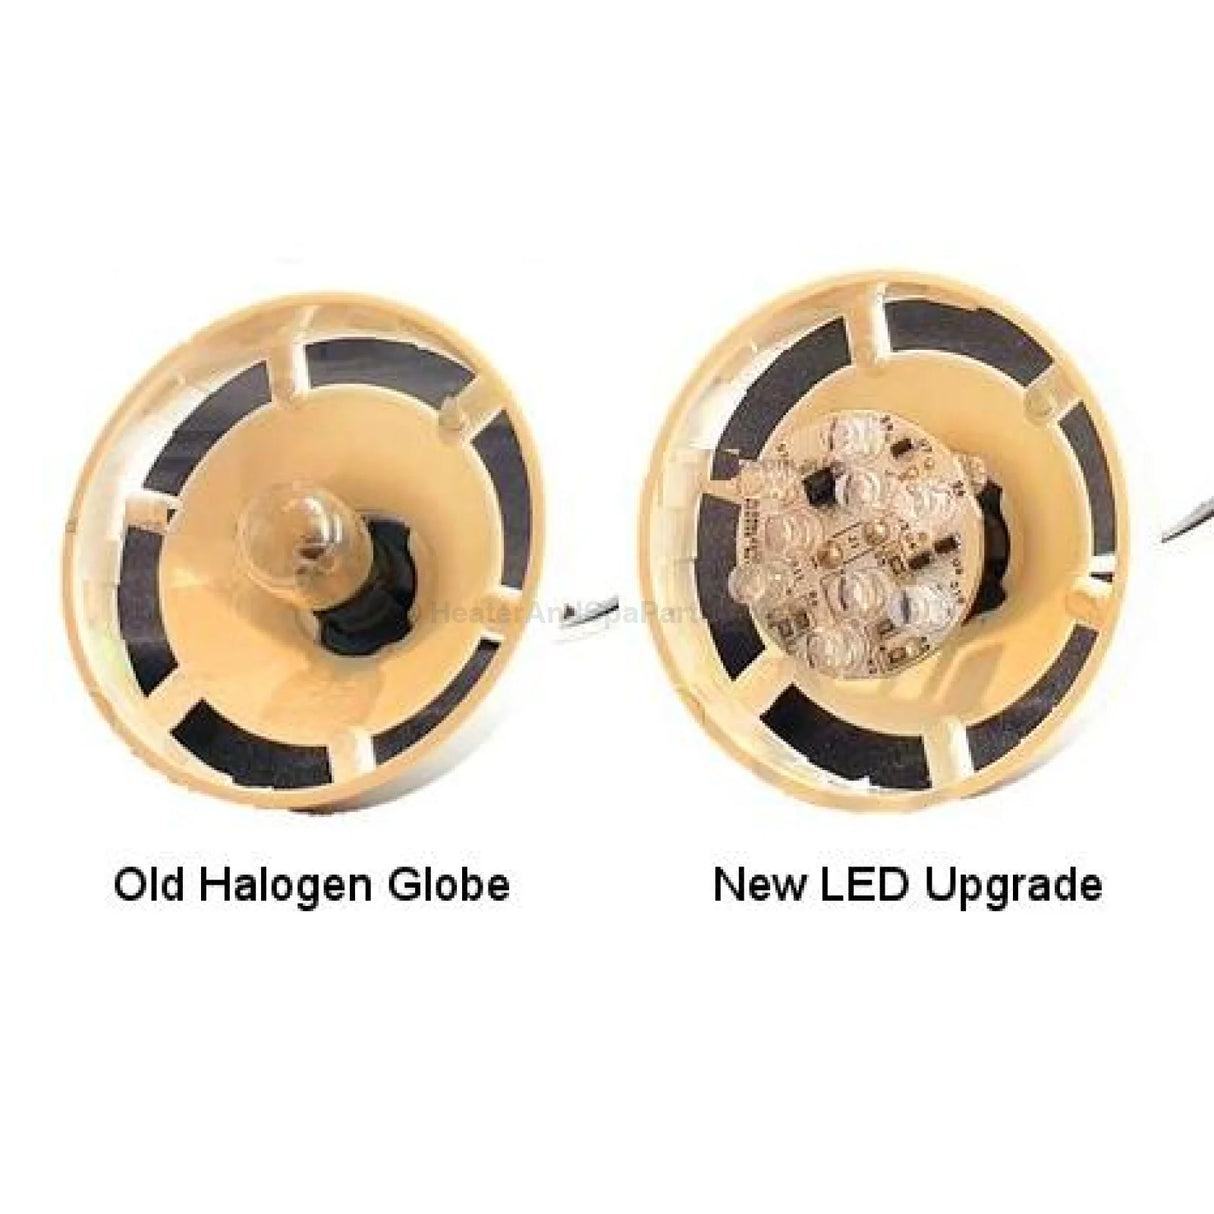 LED Spa Light Upgrade Replacement - Upgrade from Halogen Bulb (912) - Heater and Spa Parts